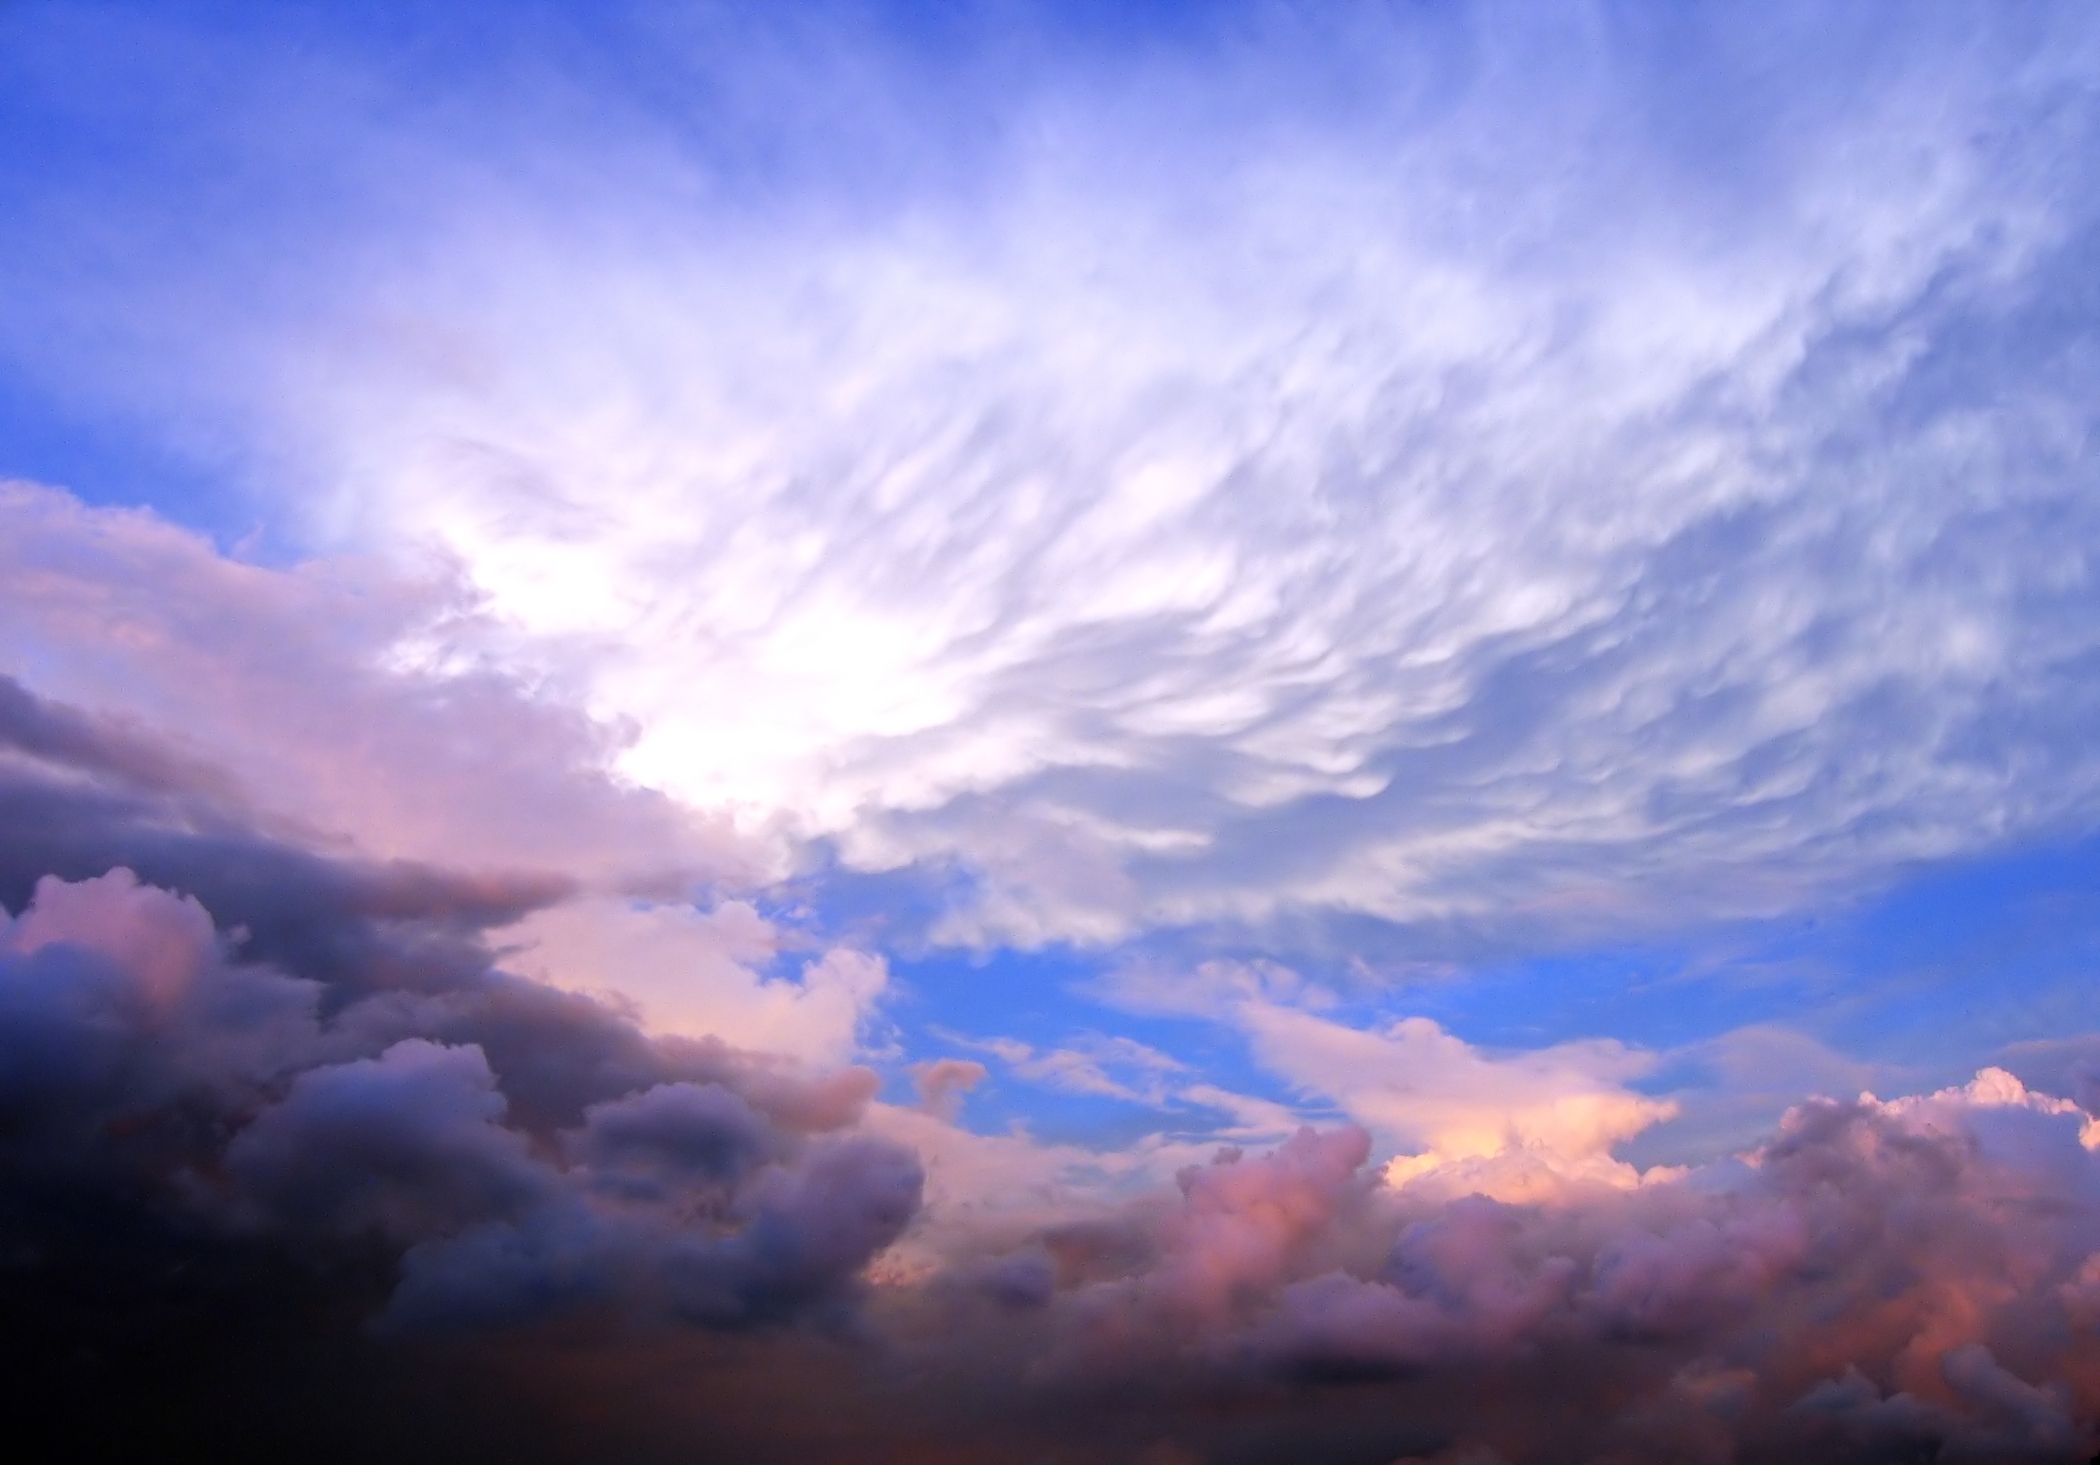 Beautiful sky and cloud formation photo